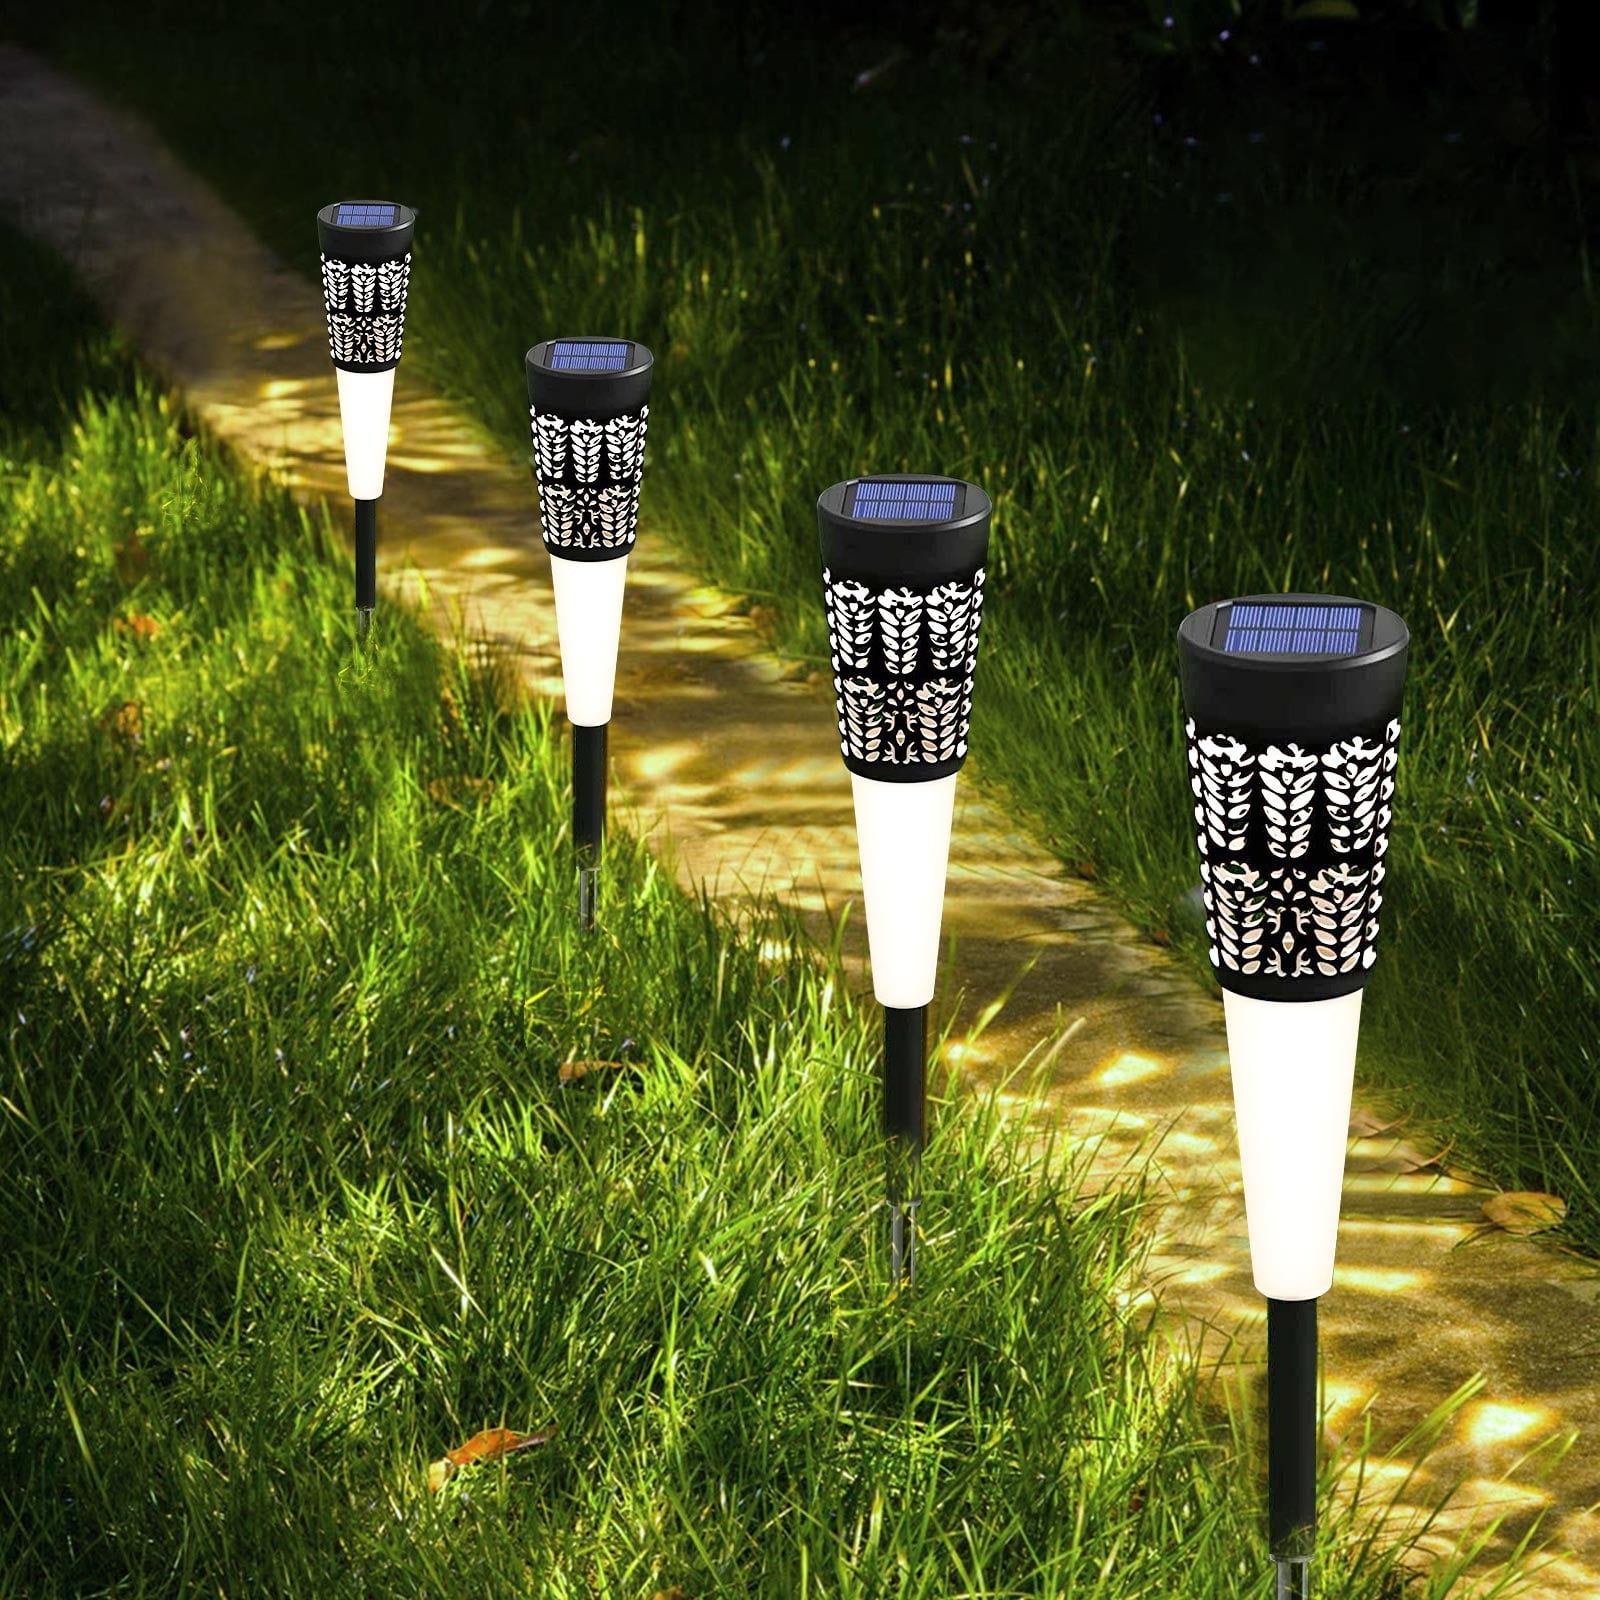 Solar Lights Outdoor Waterproof Flickering Flames Landscape Decoration Lighting 96 LED Dusk to Dawn Auto On/Off Security Torch Light for Path Garden Pathway Patio 4 Pack Solar Torch Lights